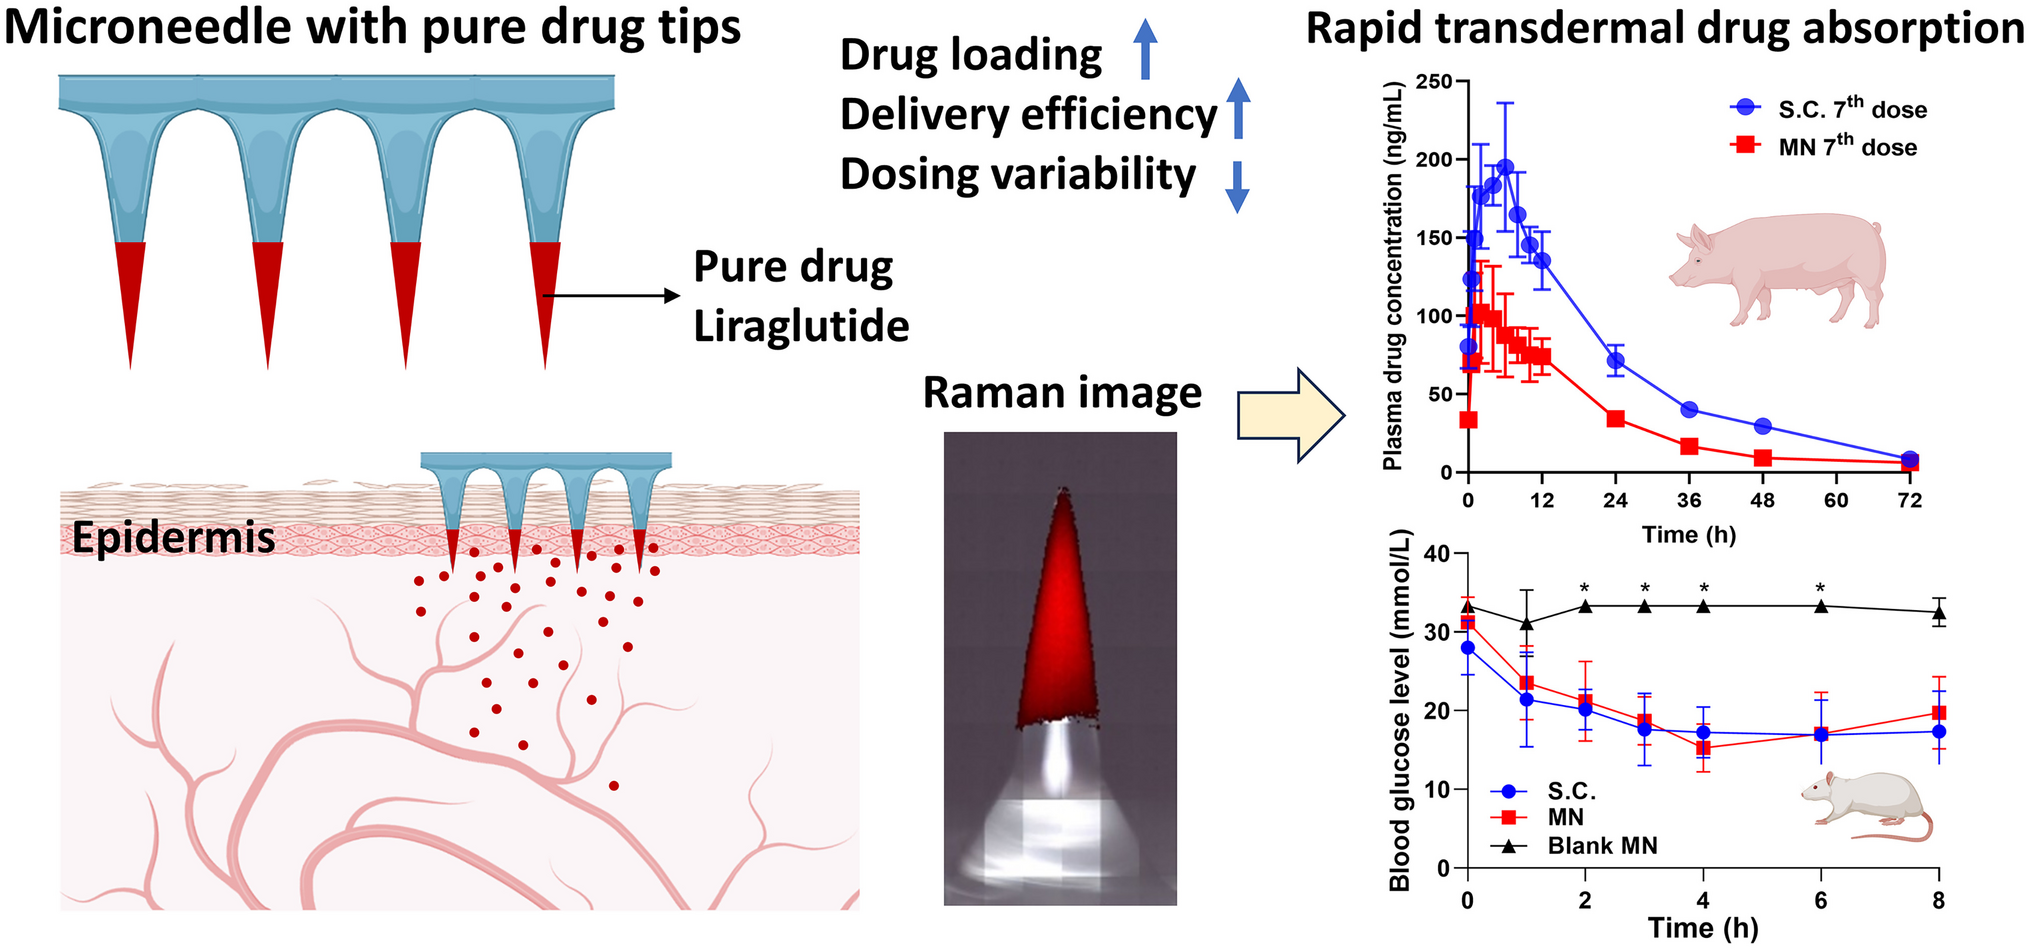 Microneedle patch with pure drug tips for delivery of liraglutide: pharmacokinetics in rats and minipigs